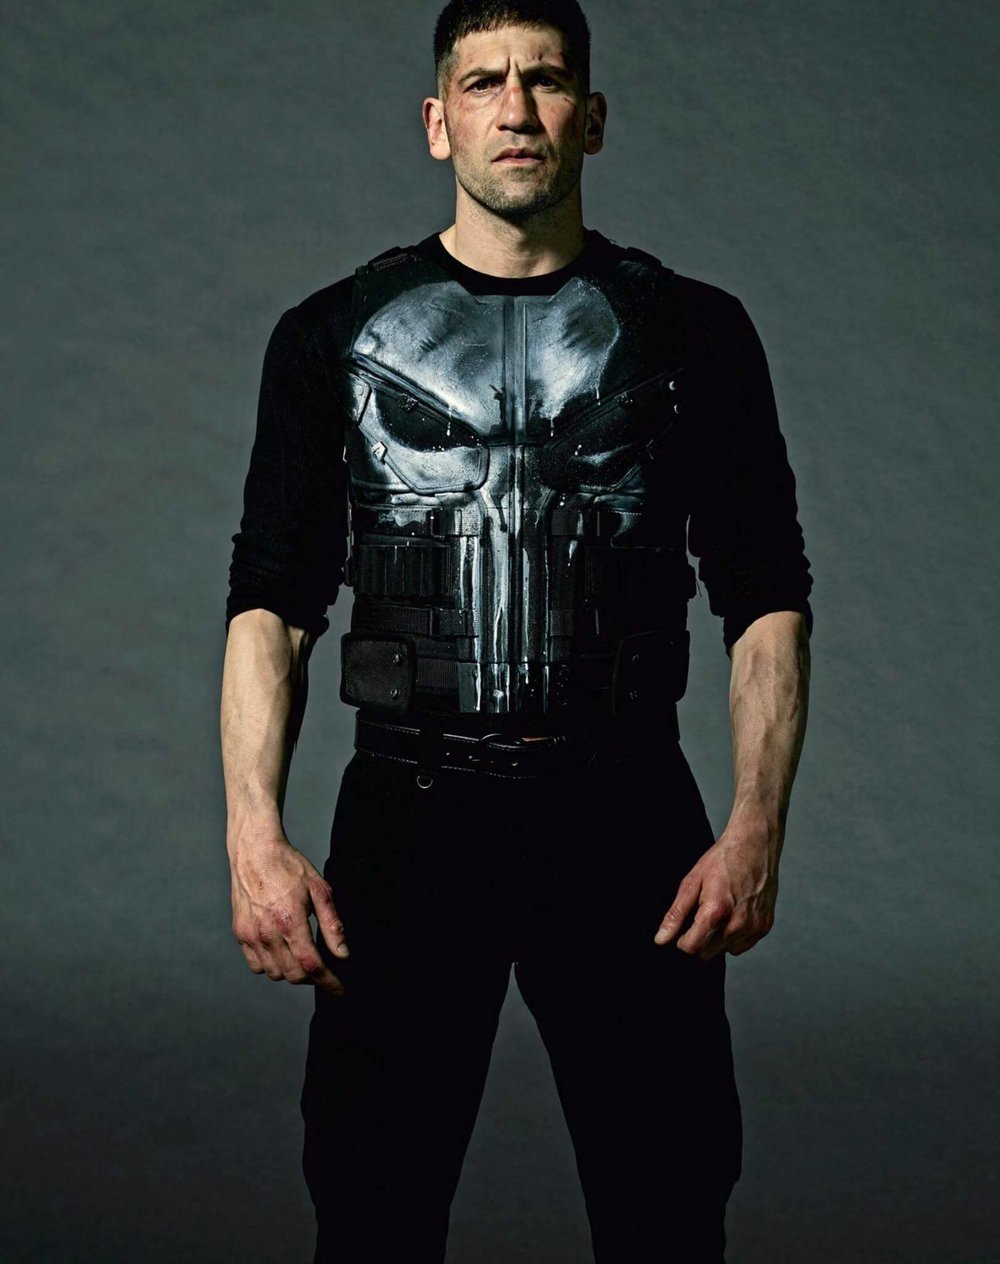 the-punisher-series-will-include-the-battle-van-plus-we-have-new-photos-of-jon-bernthal-as-frank-castle1.jpg